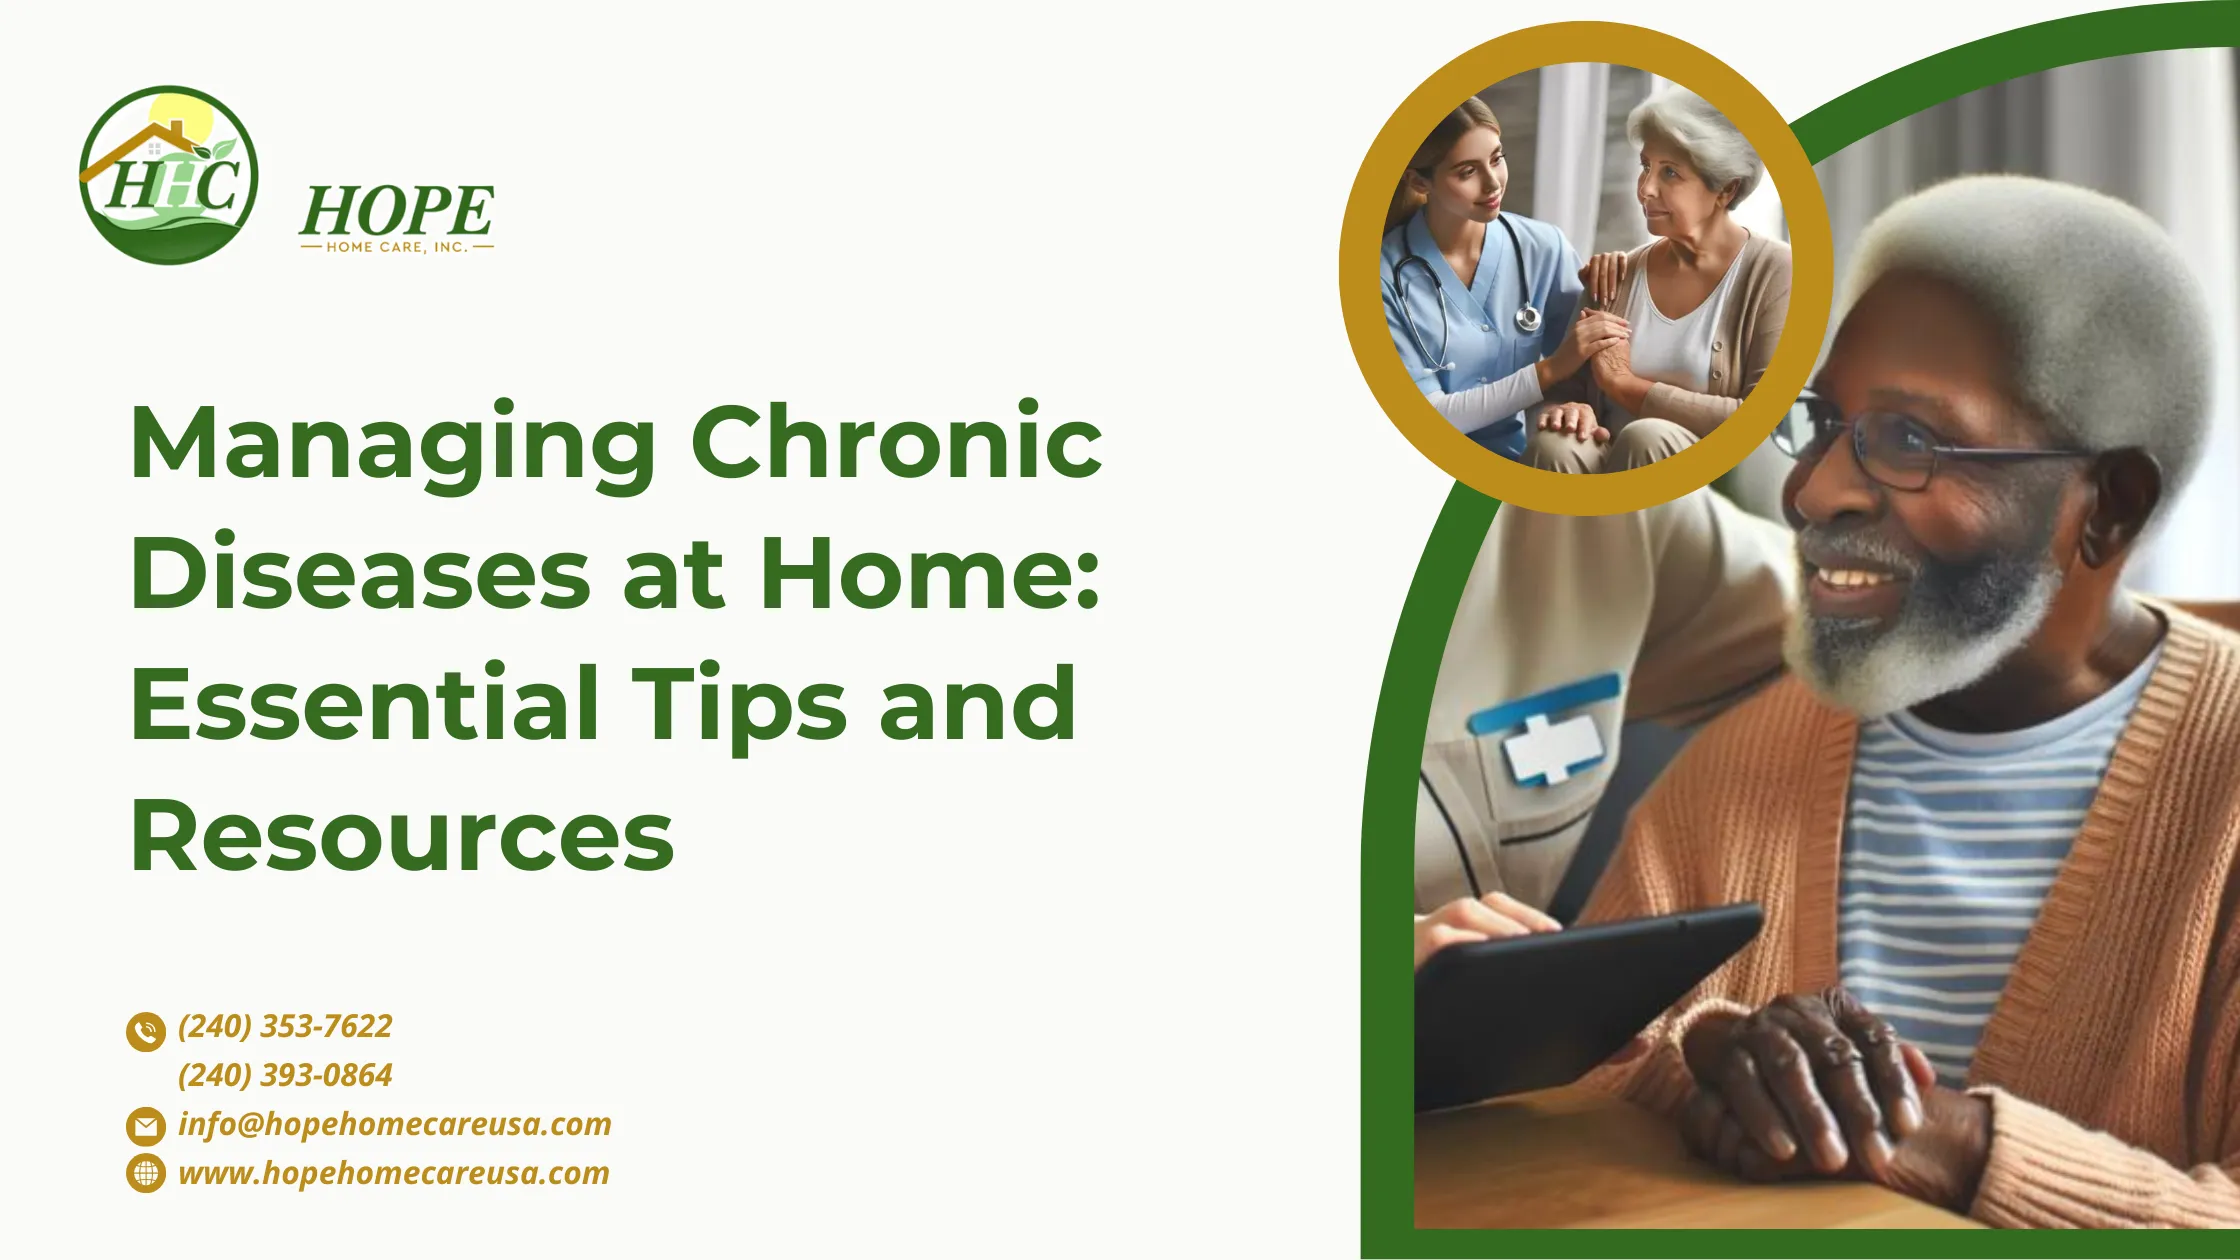 Managing Chronic Diseases at Home: Essential Tips and Resources